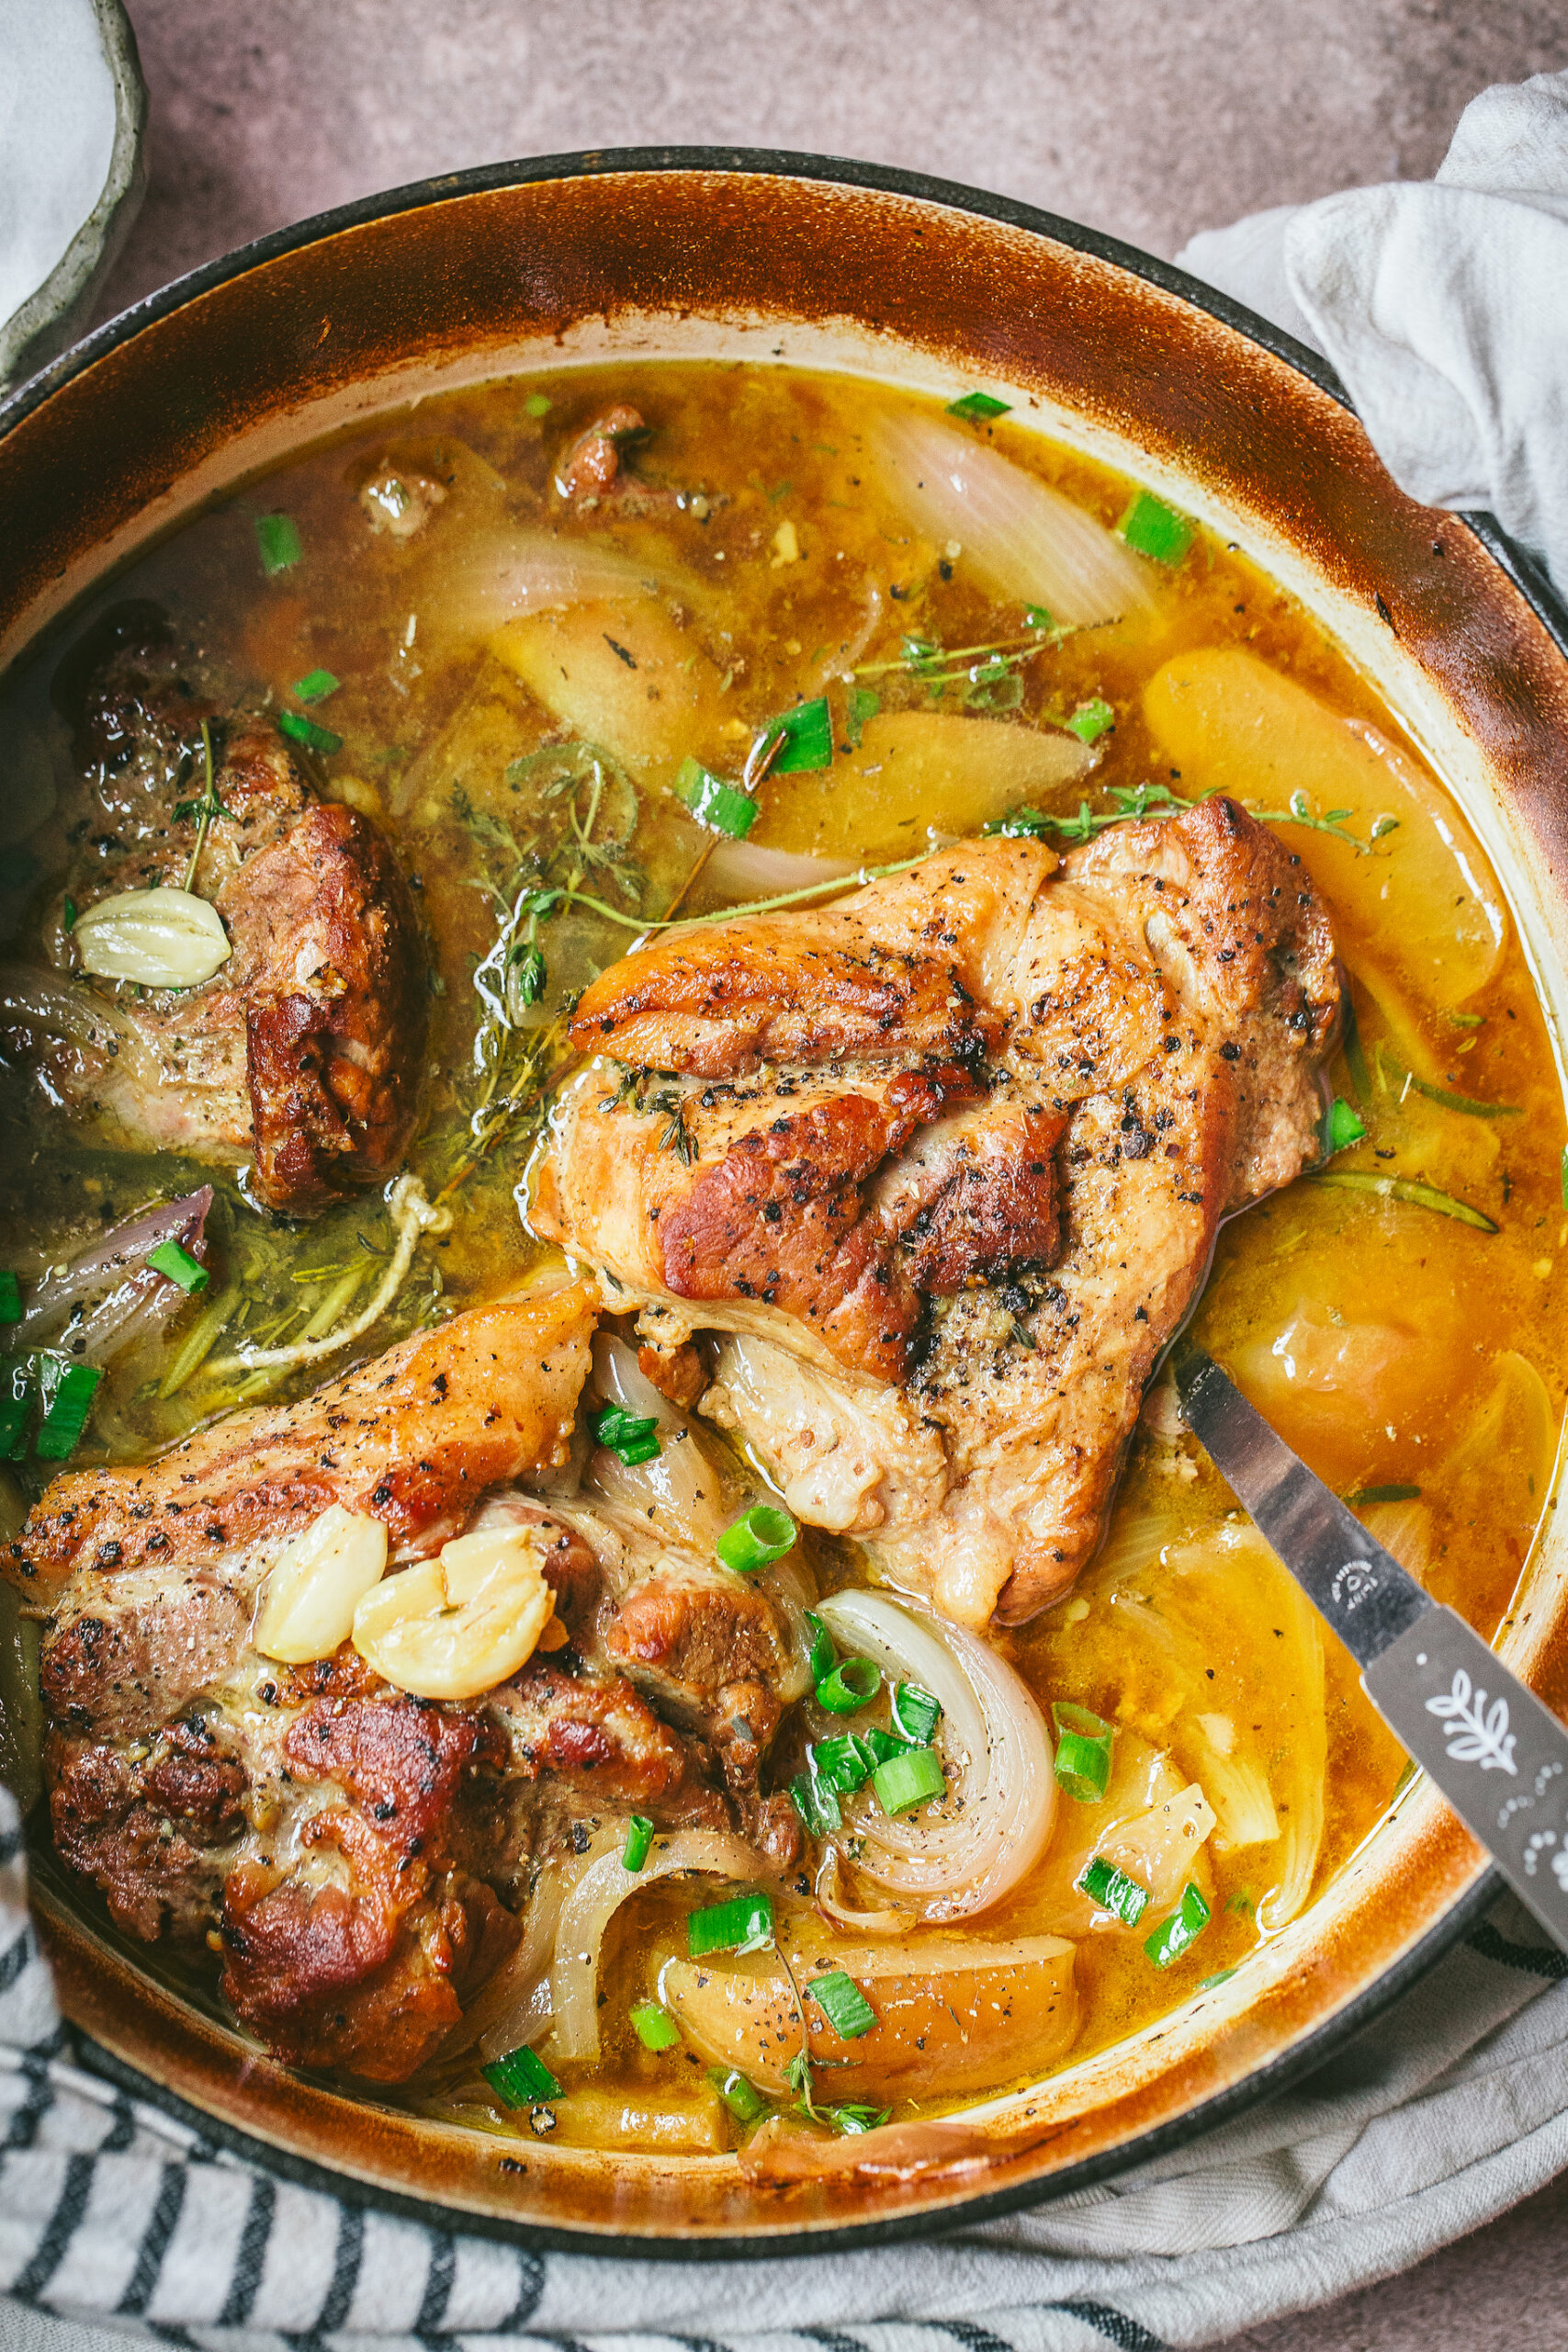 Cozy and Comforting Cider Braised Pork and Apples (our new favorite recipe for fall)